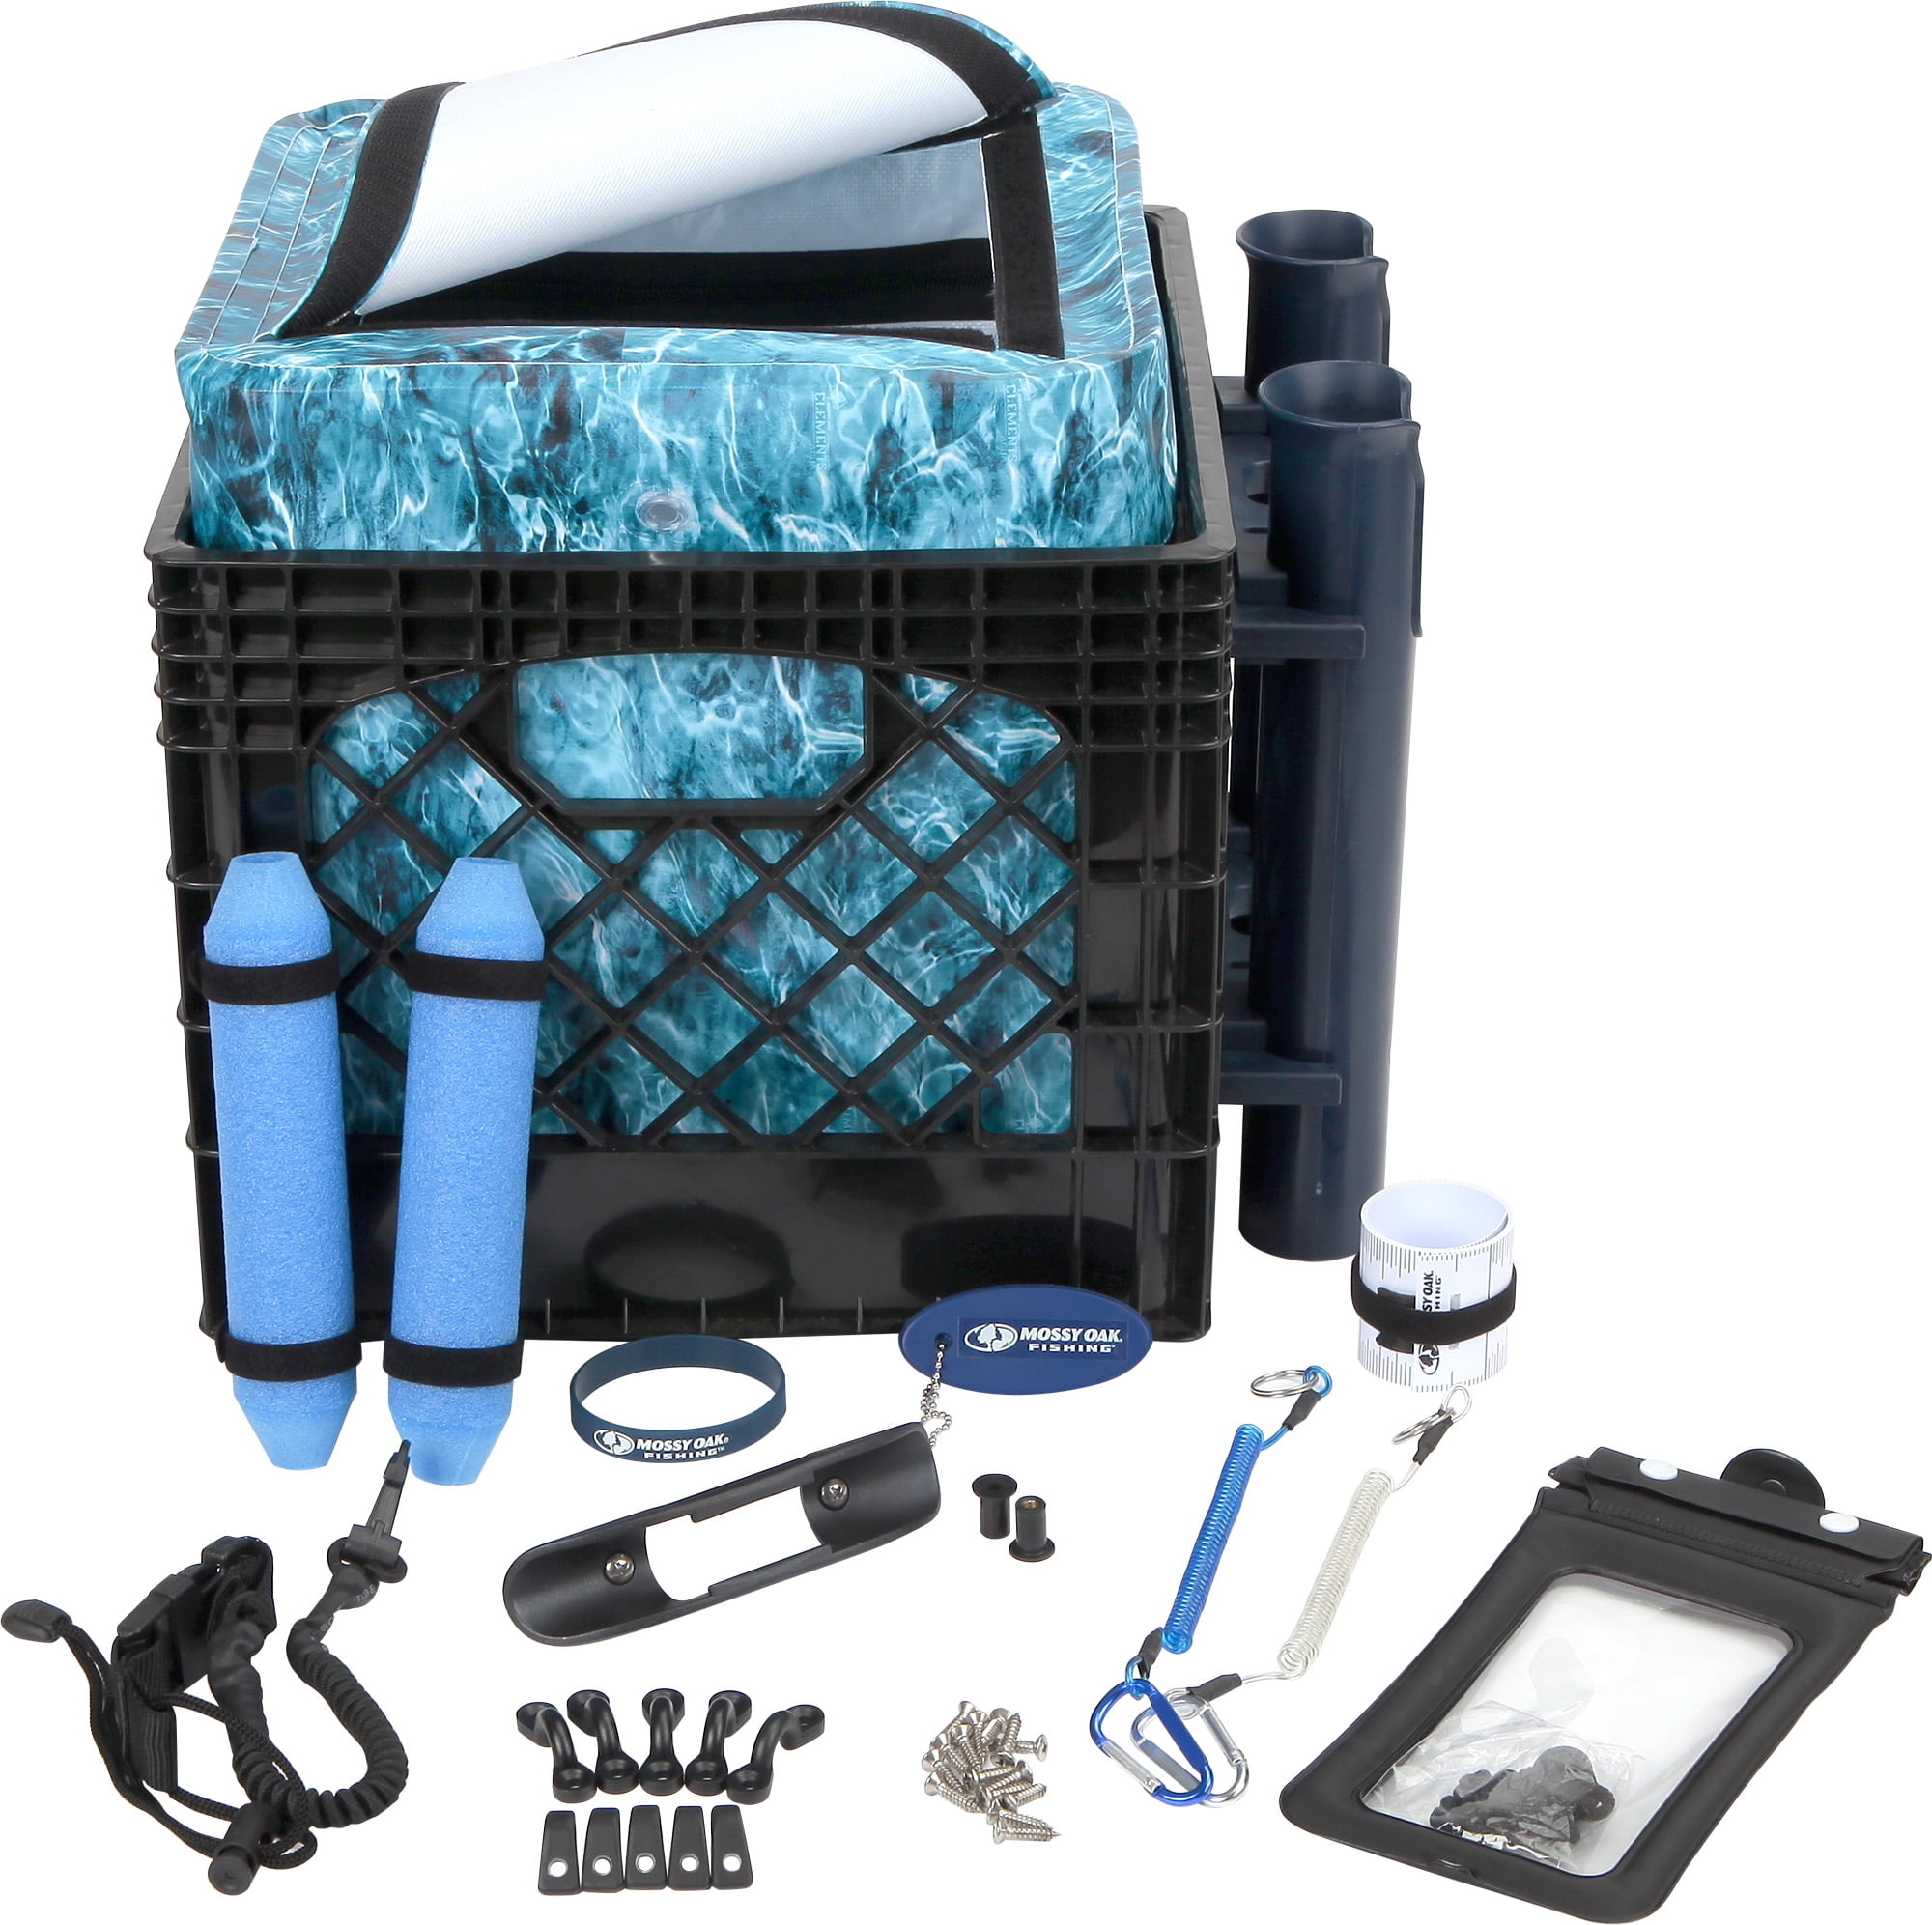 Mossy Oak Storage Crate with Dry Bag, Fishing Accessories Kit and Rod  Holder, 24 Piece, Blue 